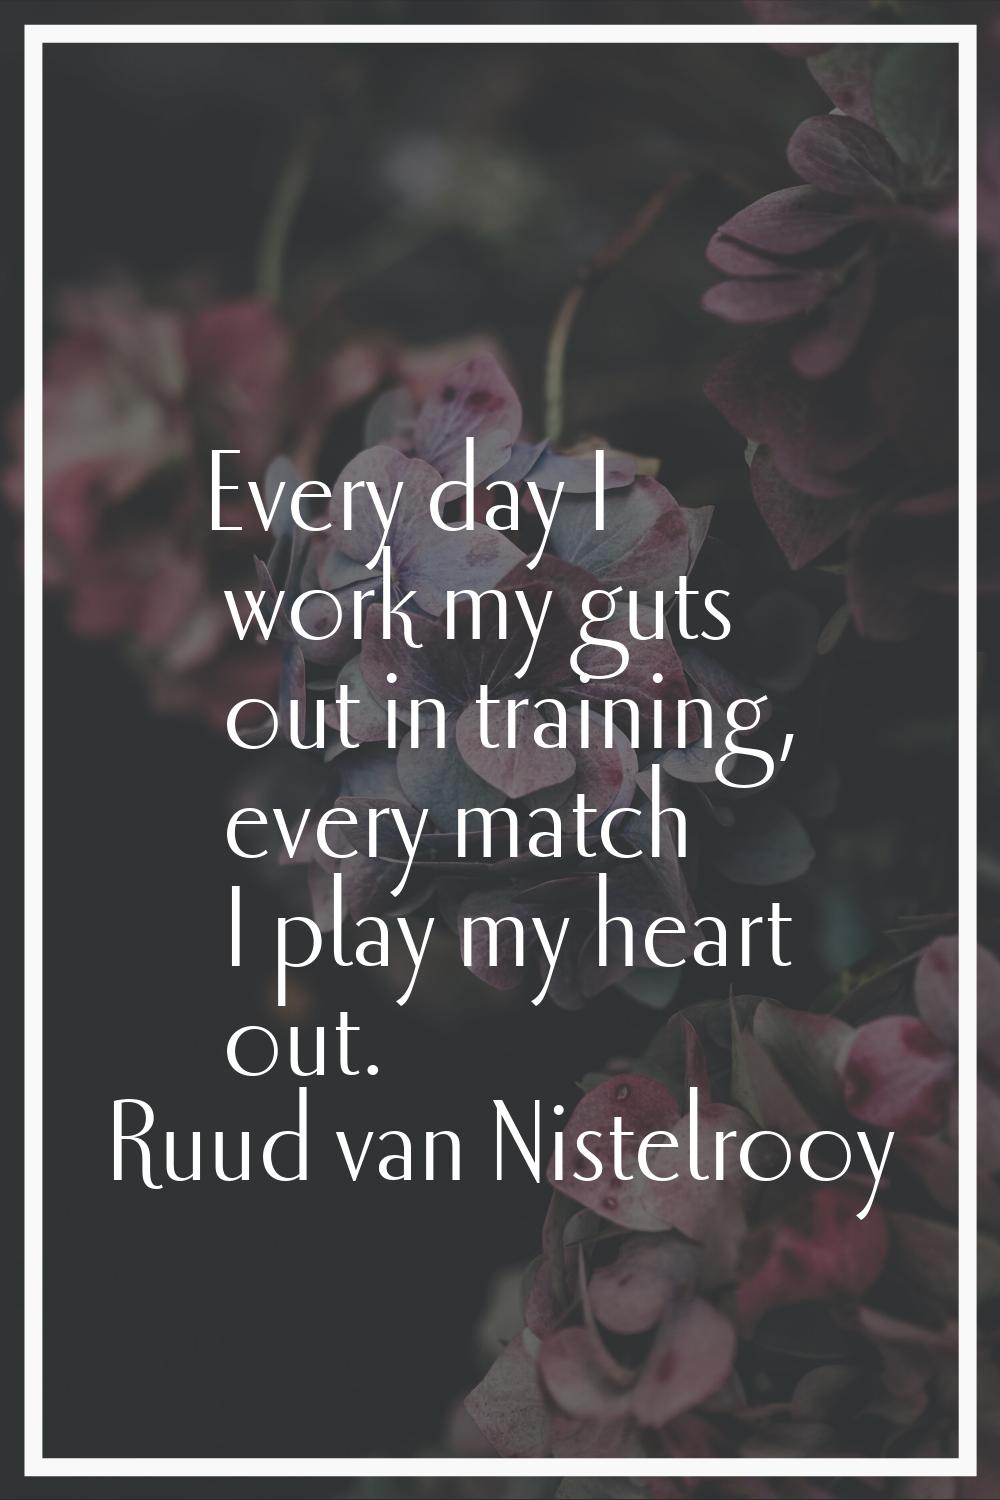 Every day I work my guts out in training, every match I play my heart out.